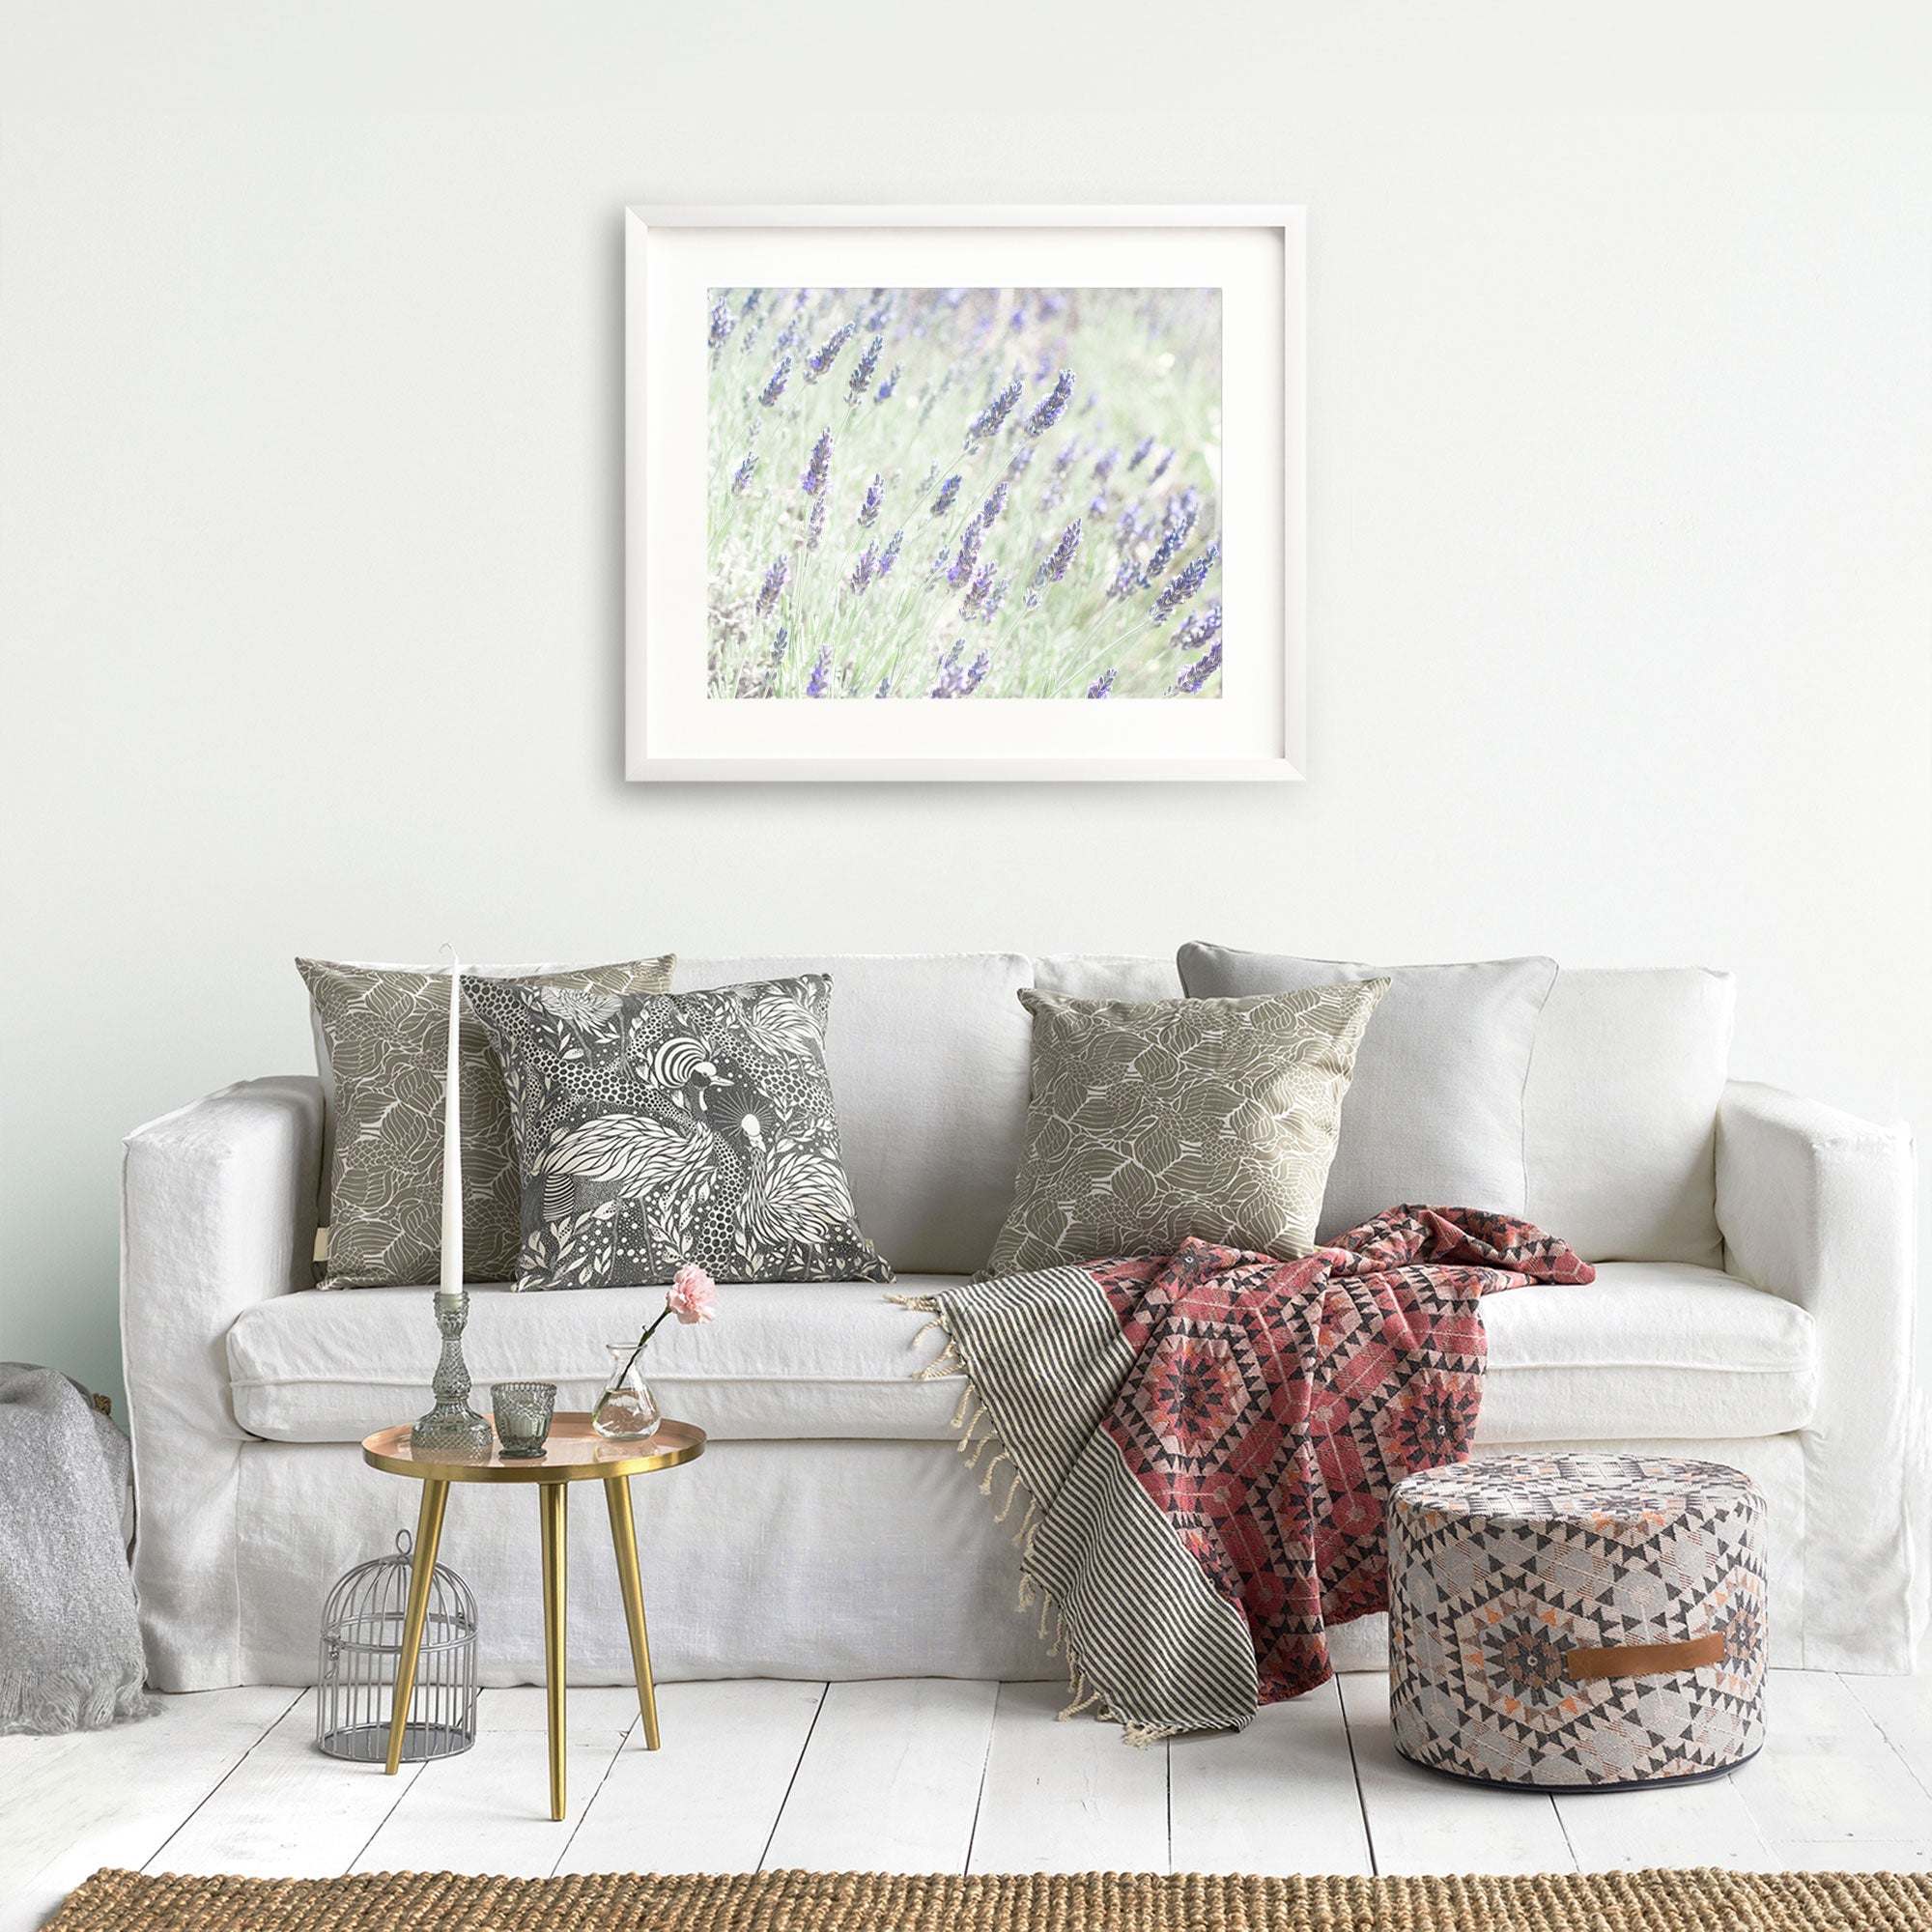 A cozy living room with a white sofa adorned with patterned pillows, a red patterned throw blanket, a small round gold table with decorative items, and Offley Green&#39;s &#39;Lavender for LaLa&#39; Floral Purple Print above the sofa.